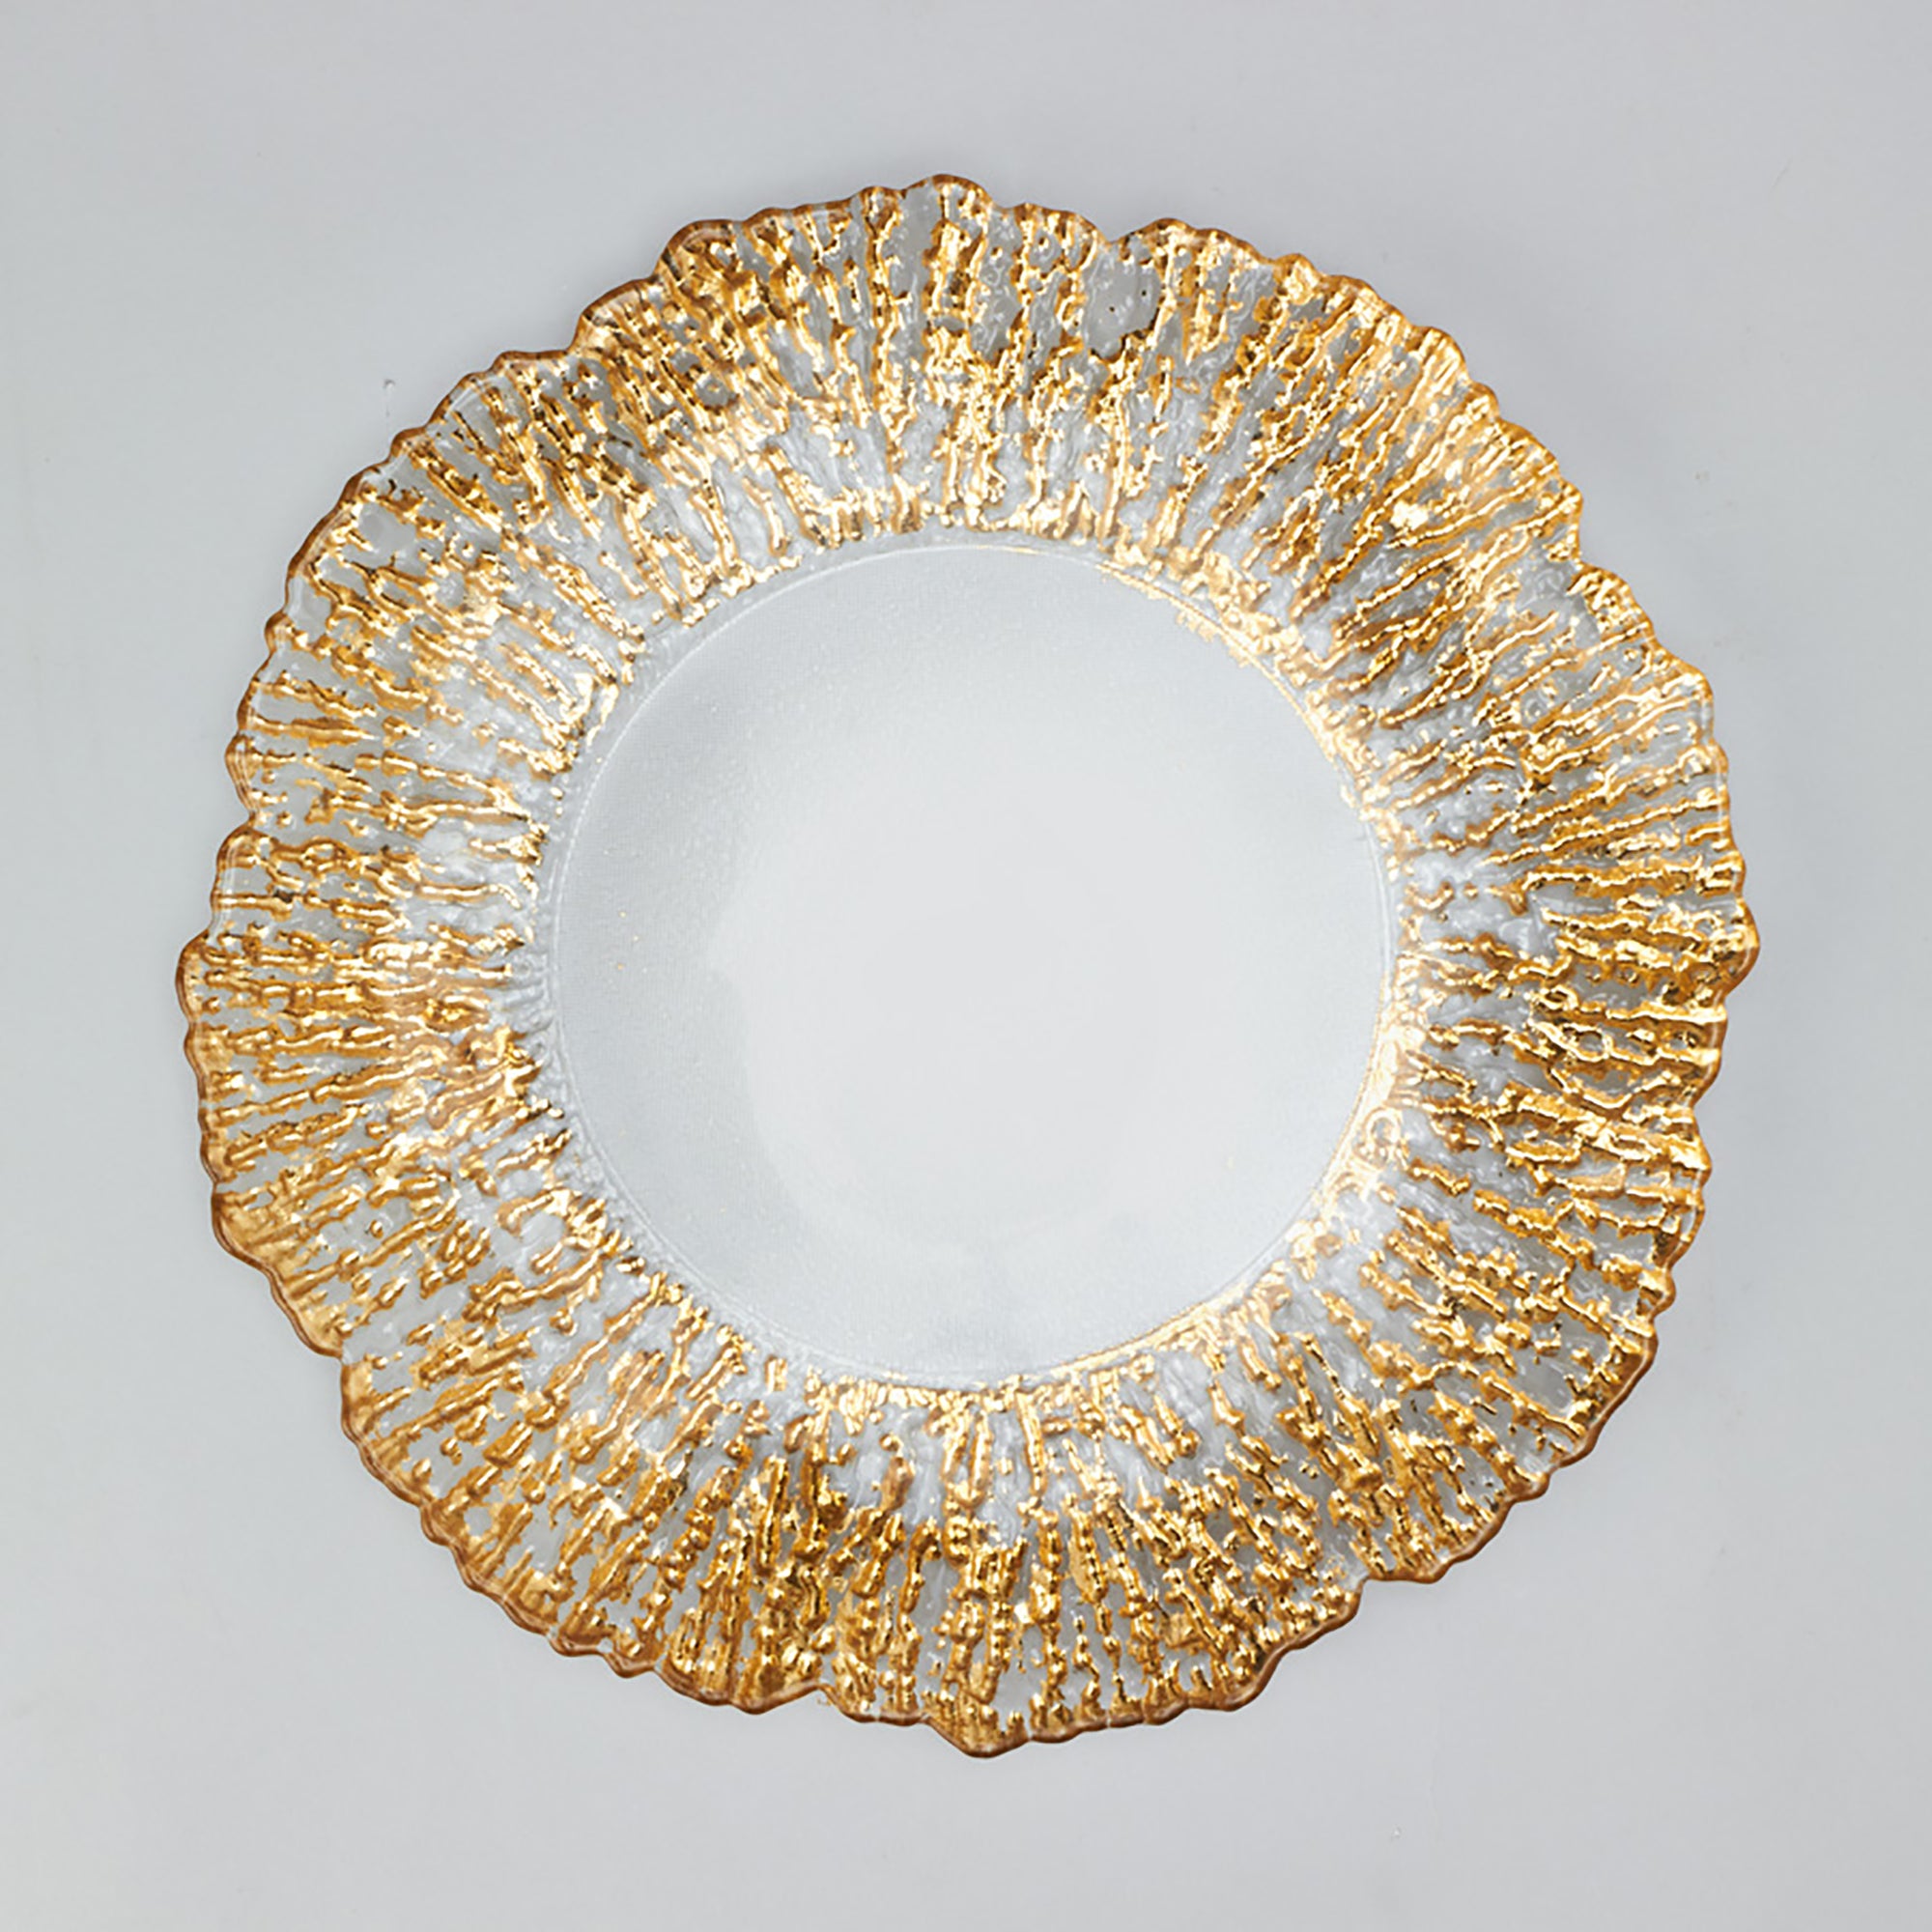 Glass gold reef plate